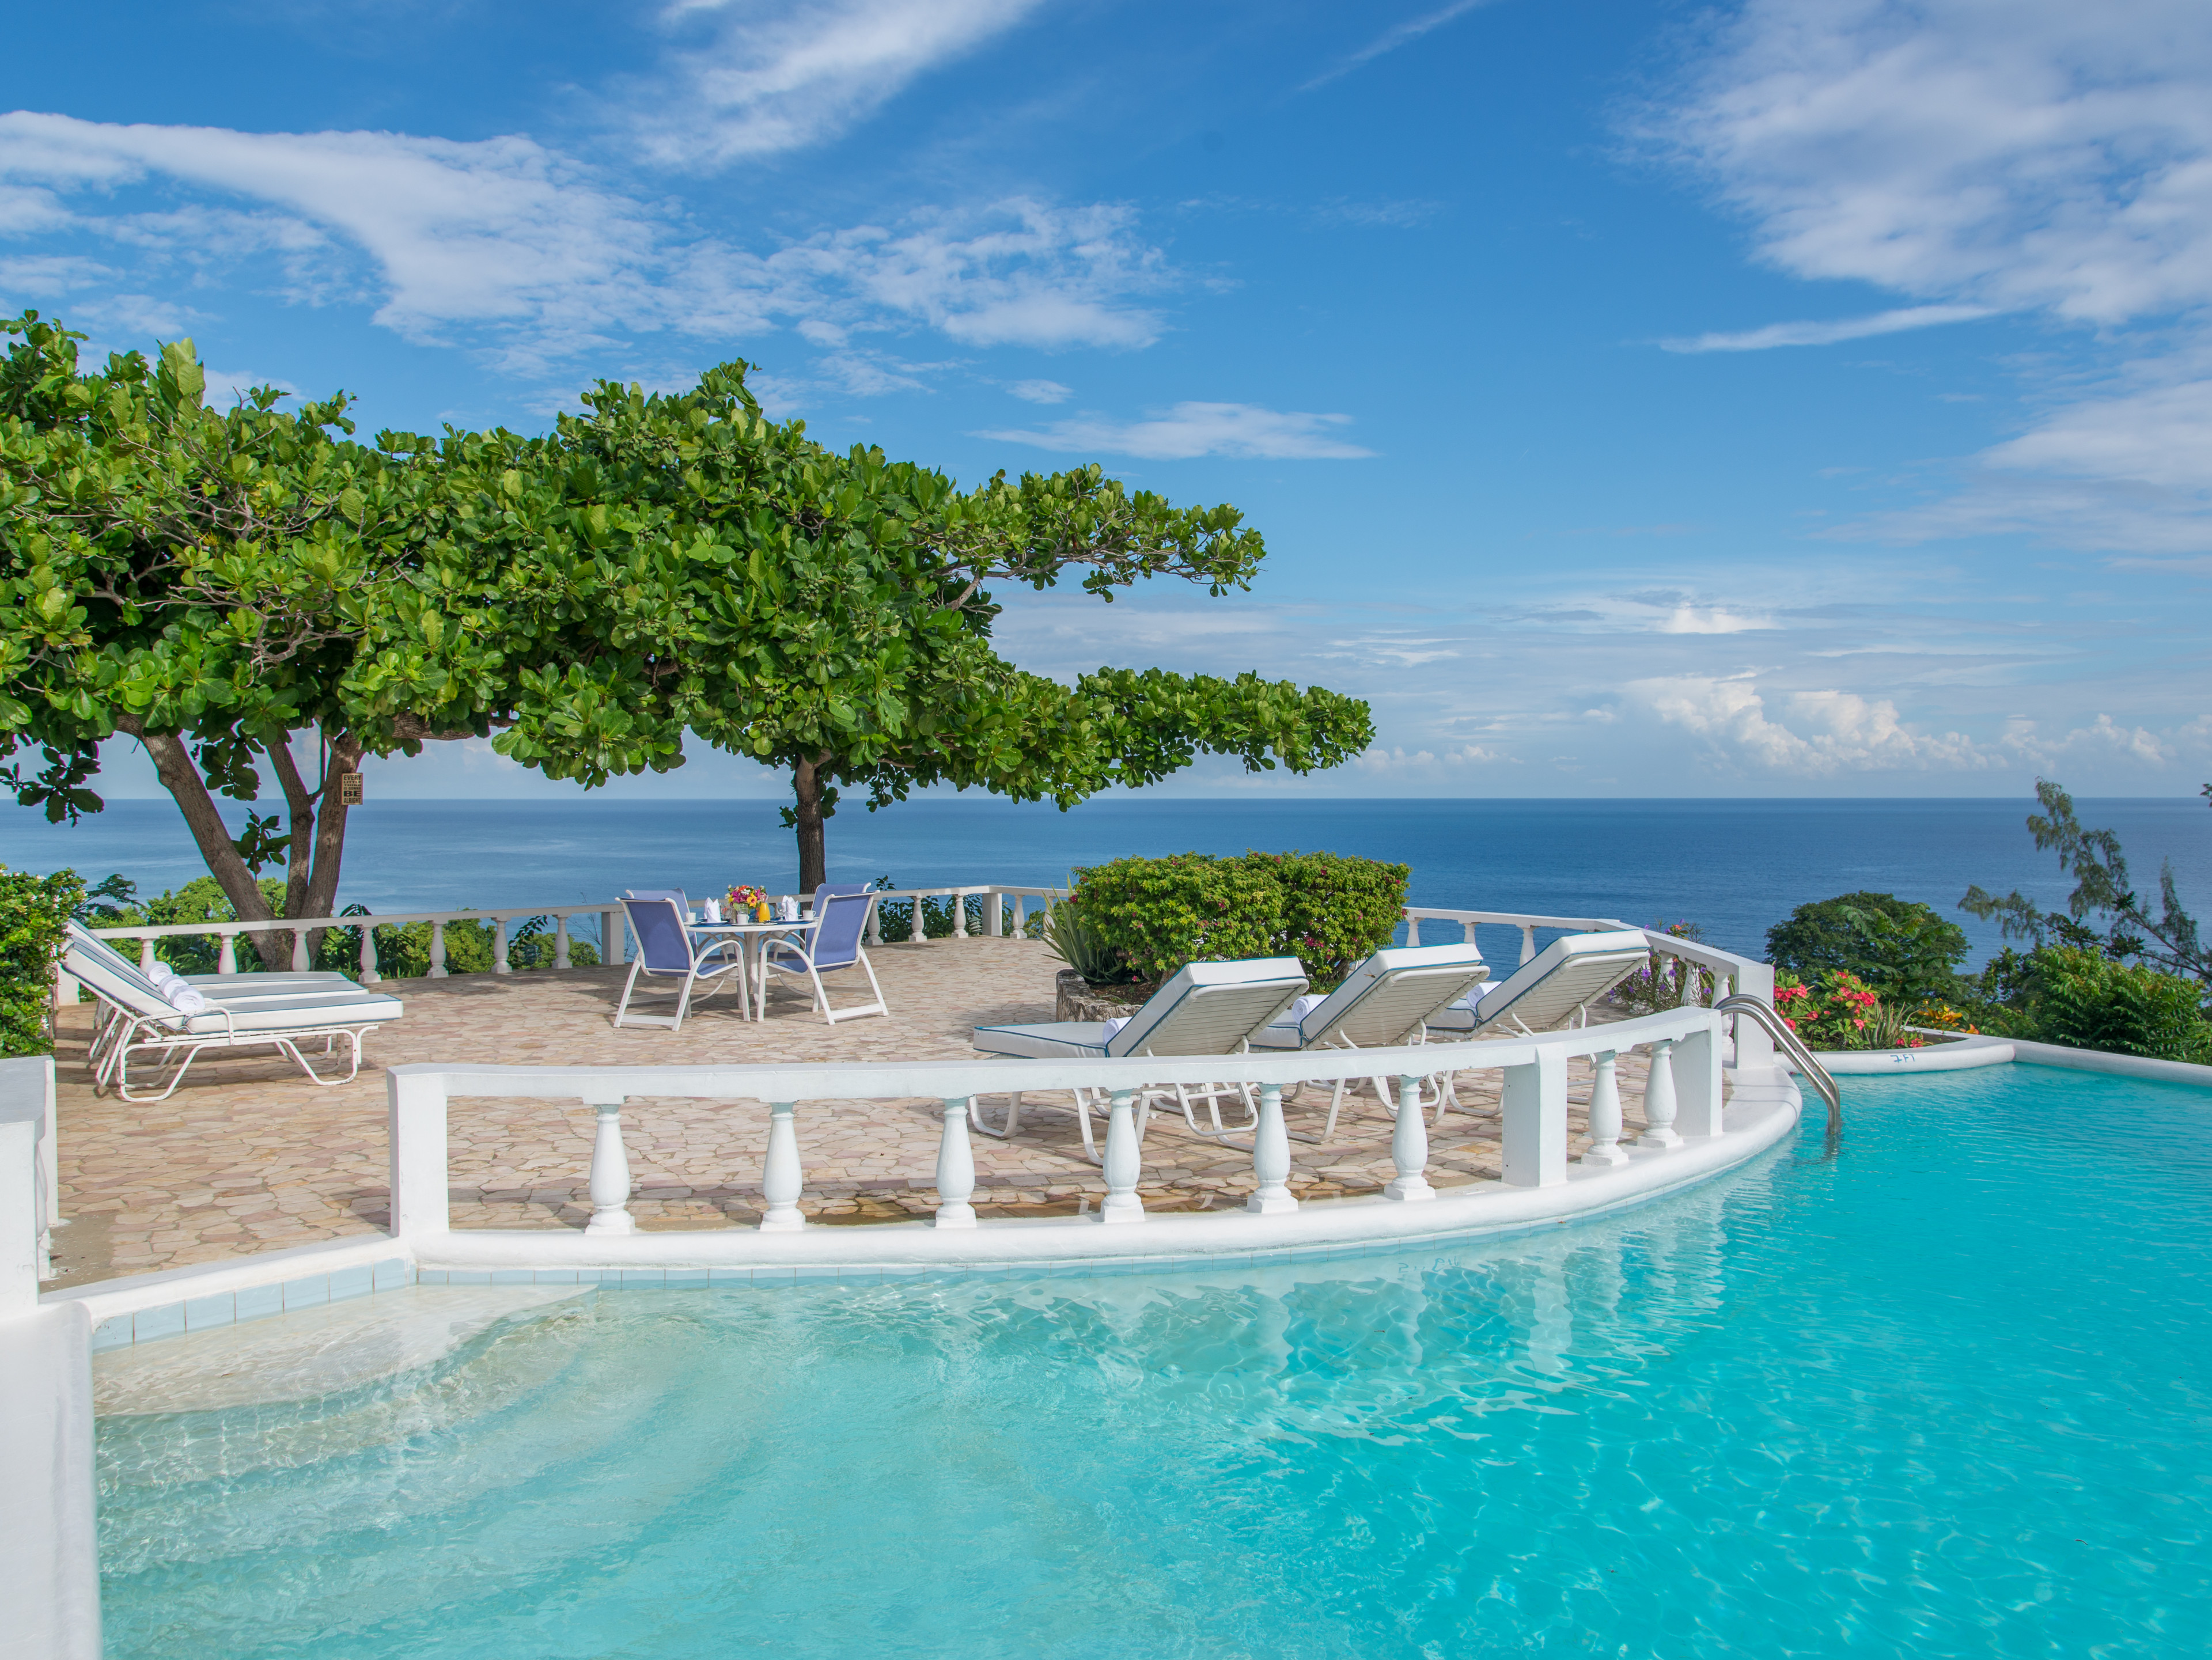 Cliffside Cottage villas in Jamaica with private pools